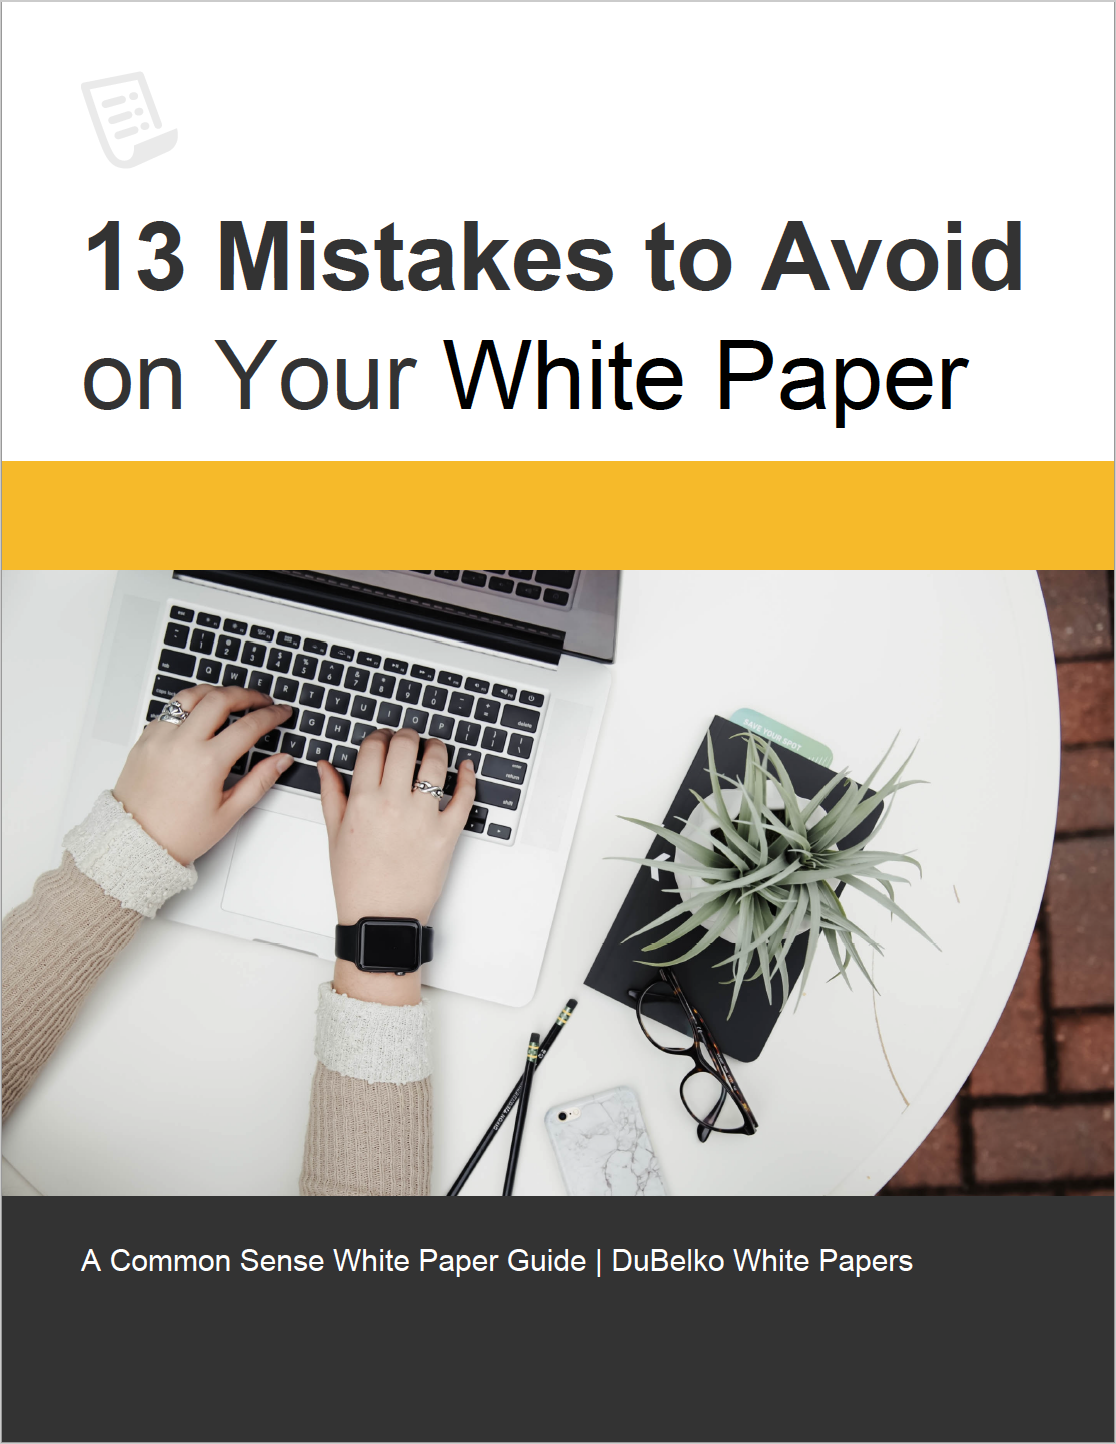 What Is a White Paper? [FAQs]